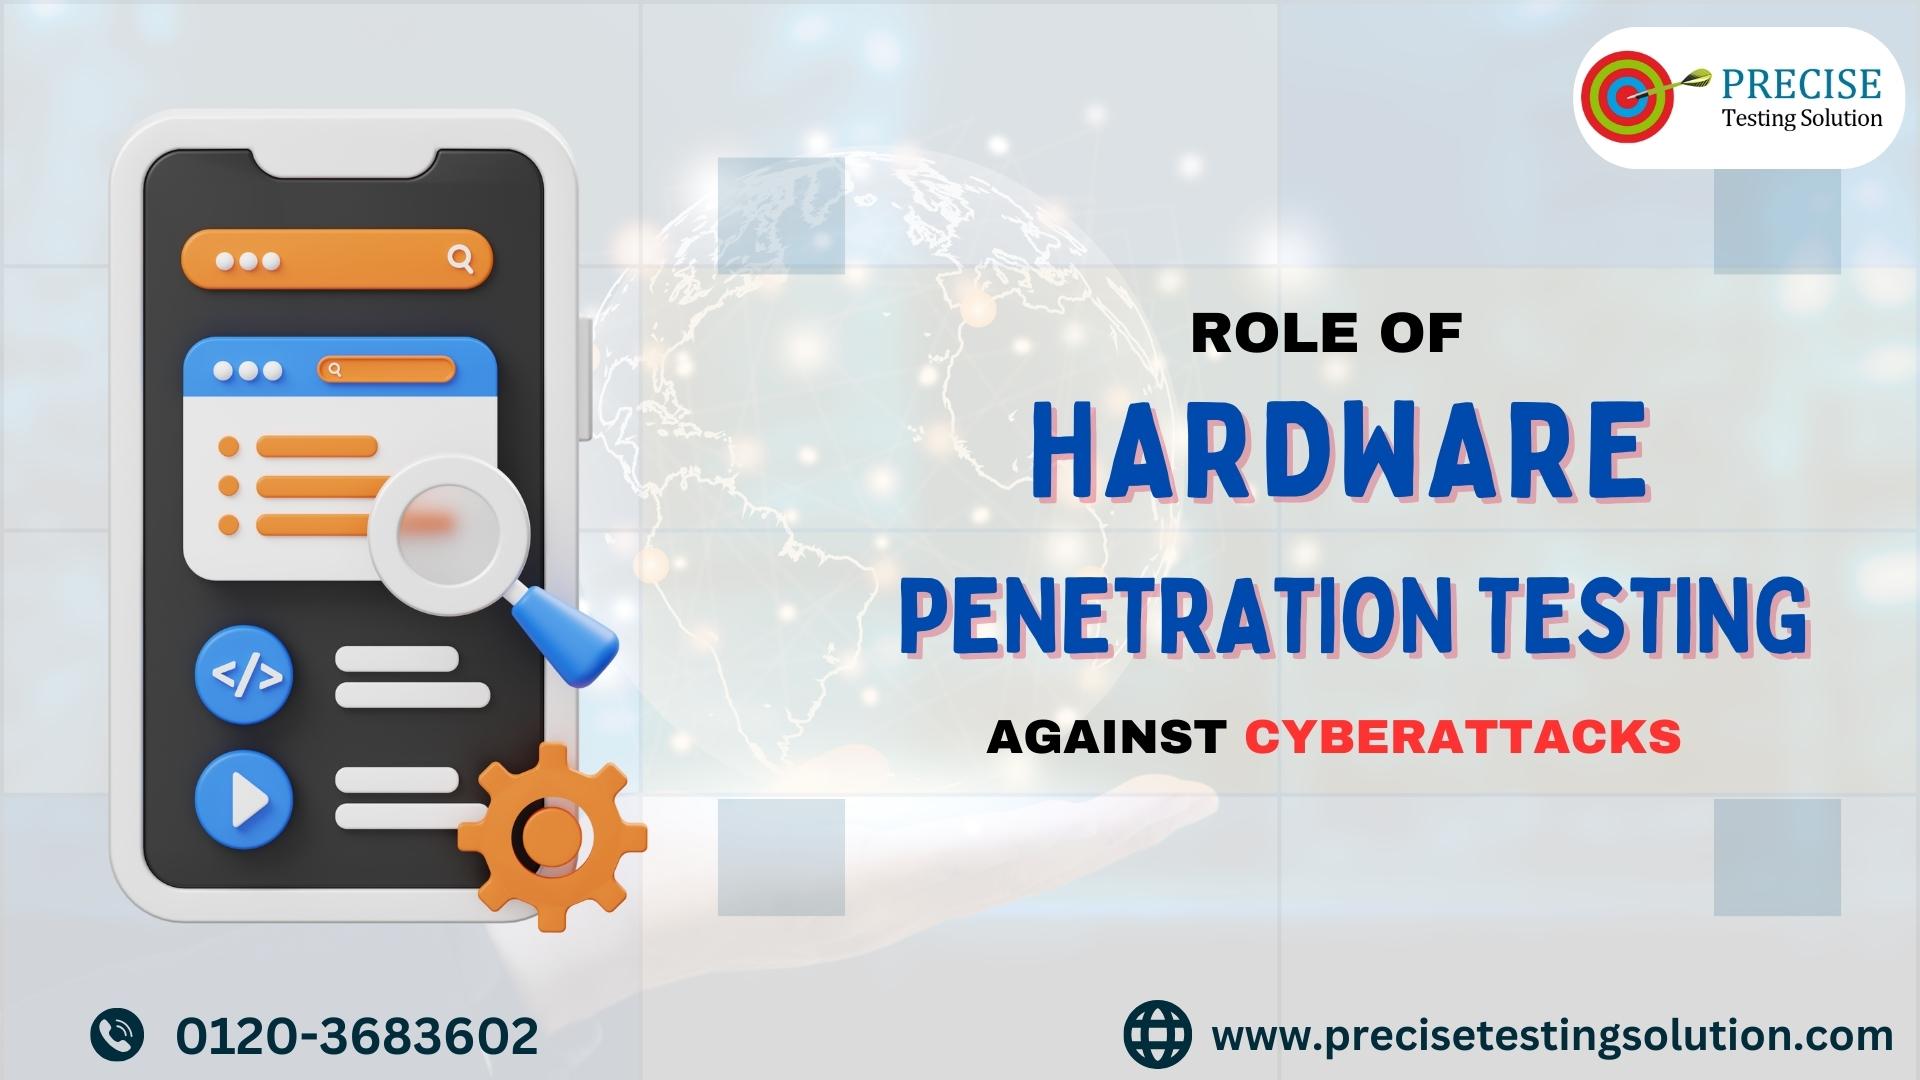 Role of Hardware Penetration Testing against Cyberattacks